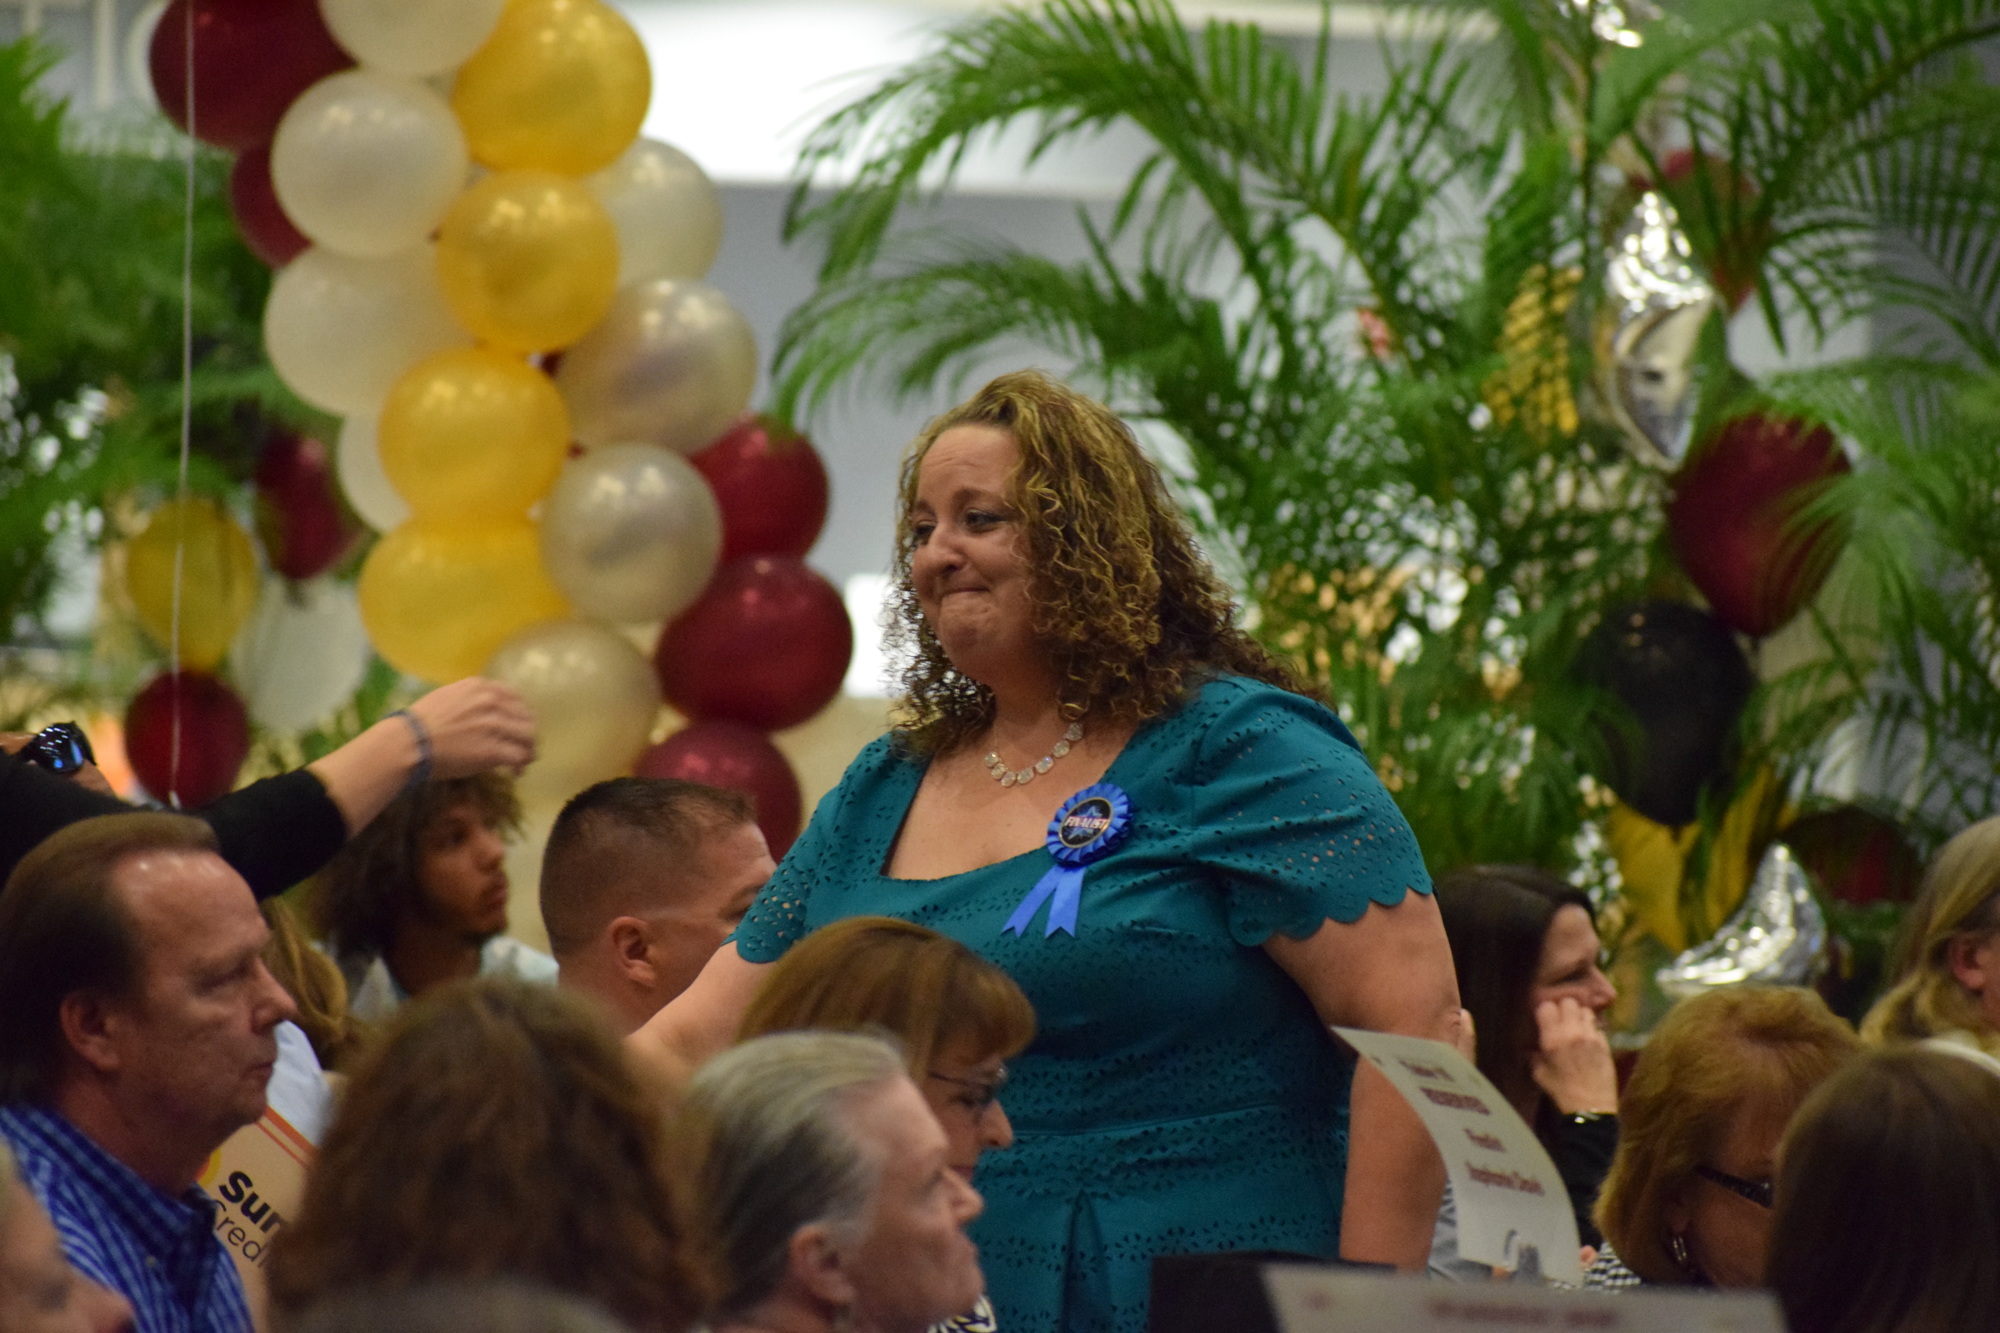 After winning the Support Employee of the year award, an emotional Amanda Keeney makes her way through the crowd back to her seat.